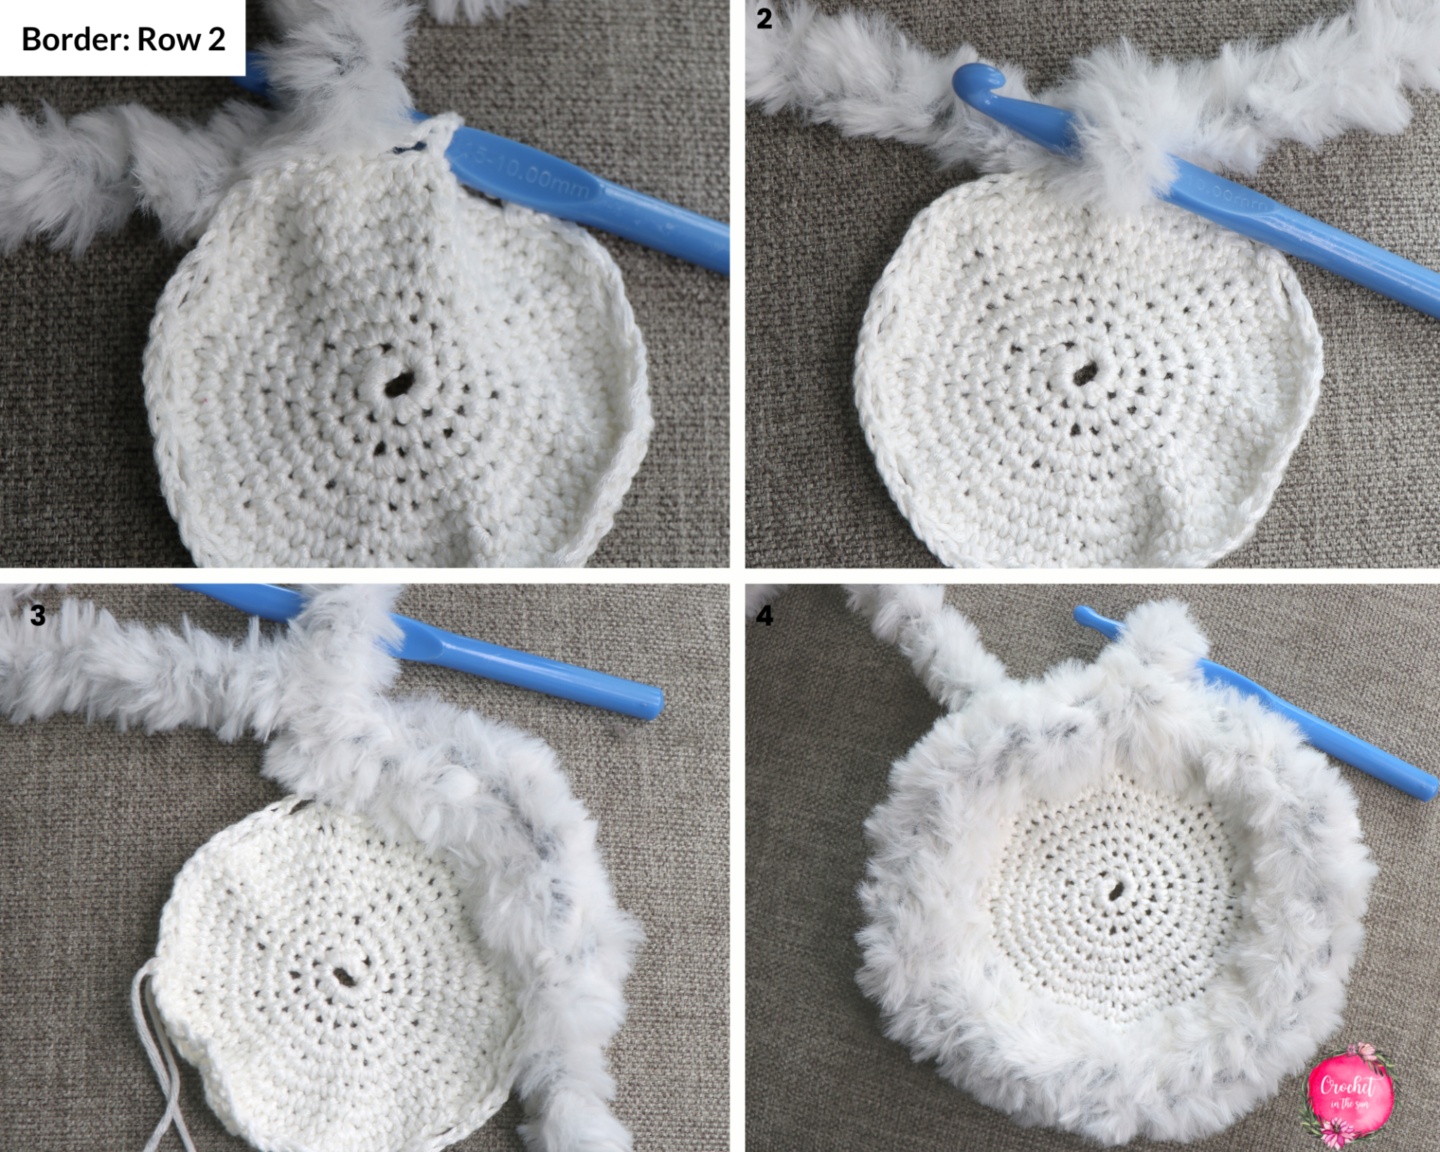 Lion Brand Go for Faux crochet coaster pattern!Photo tutorial for an easy crochet coaster pattern that is quick, beginner friendly, and beautiful. This shows the making of the border.